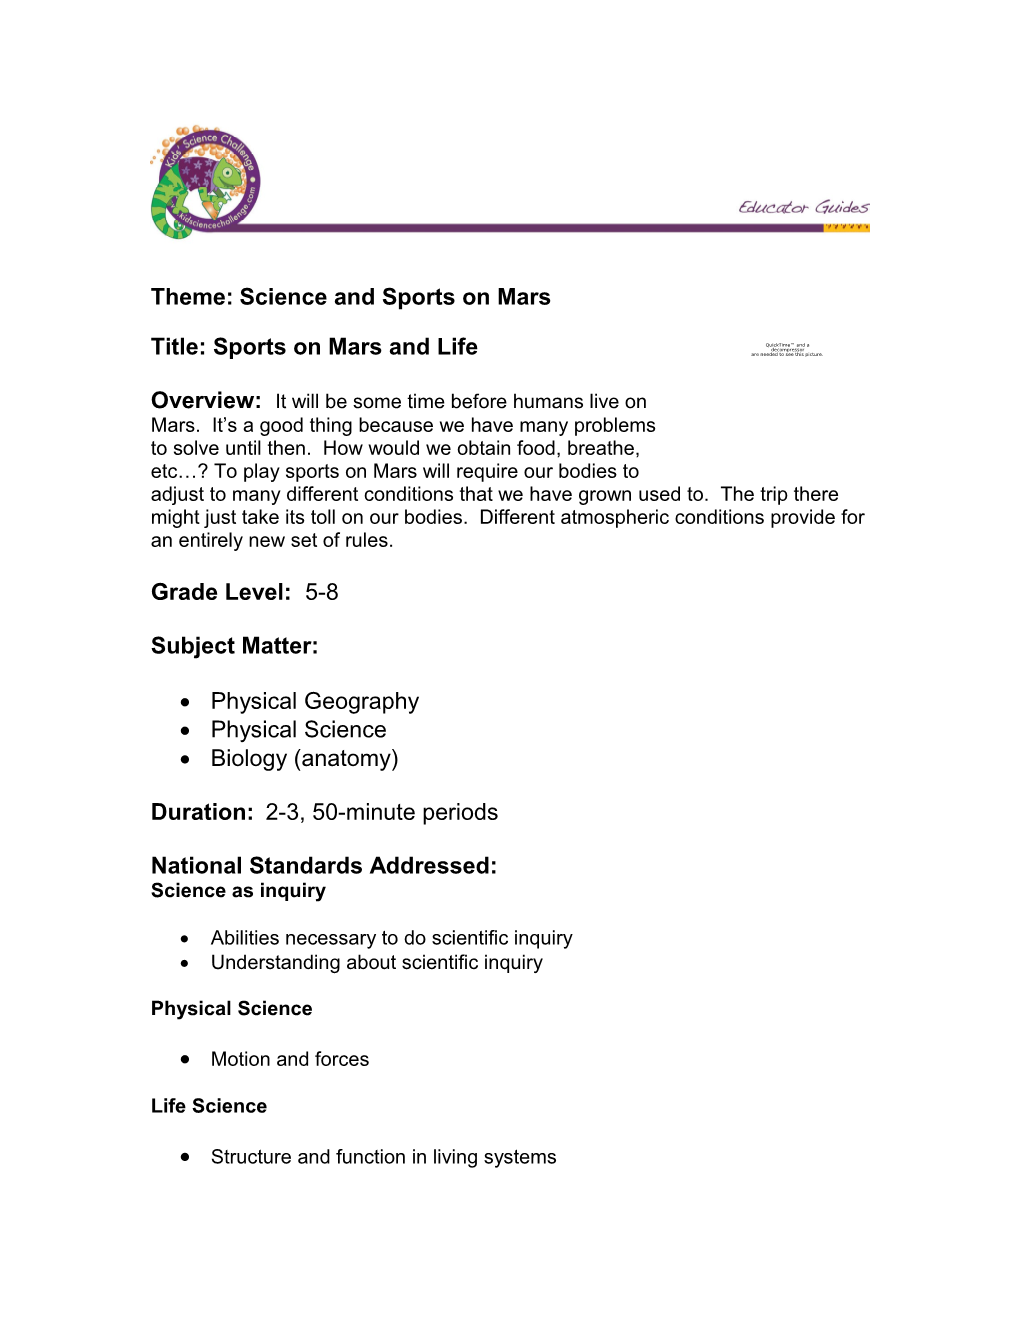 Title: Sports on Mars and Life